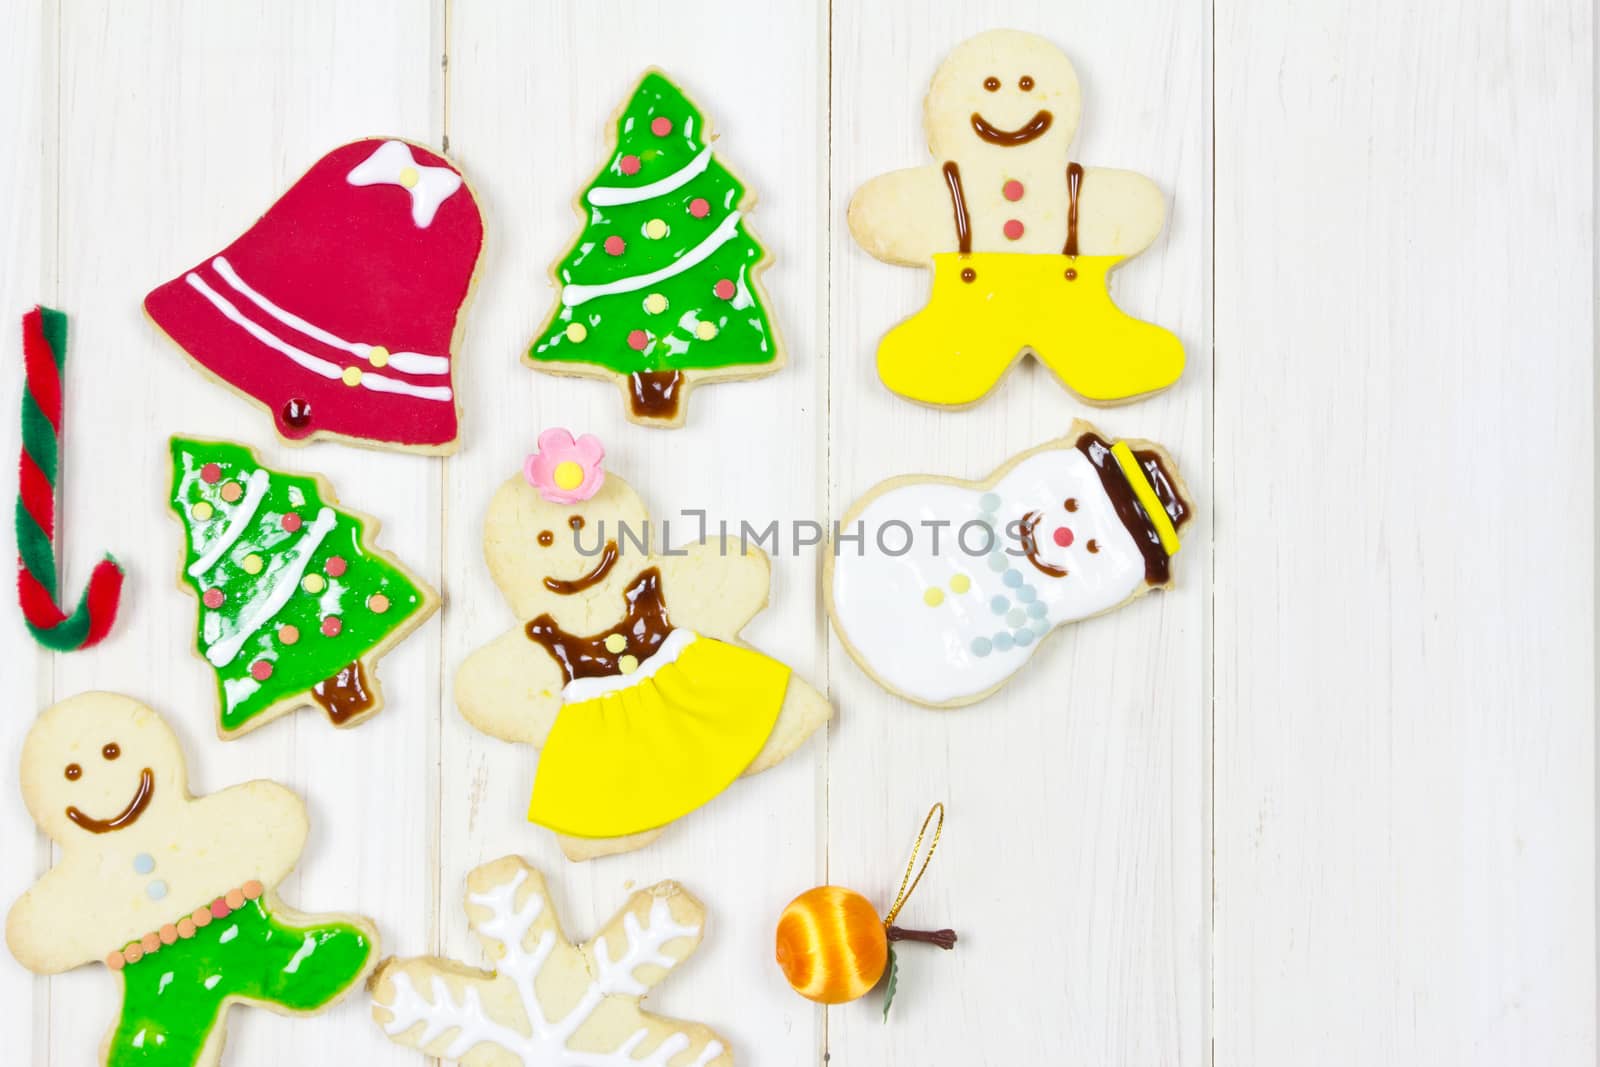 Cookies decorated with a Christmas theme  by wyoosumran